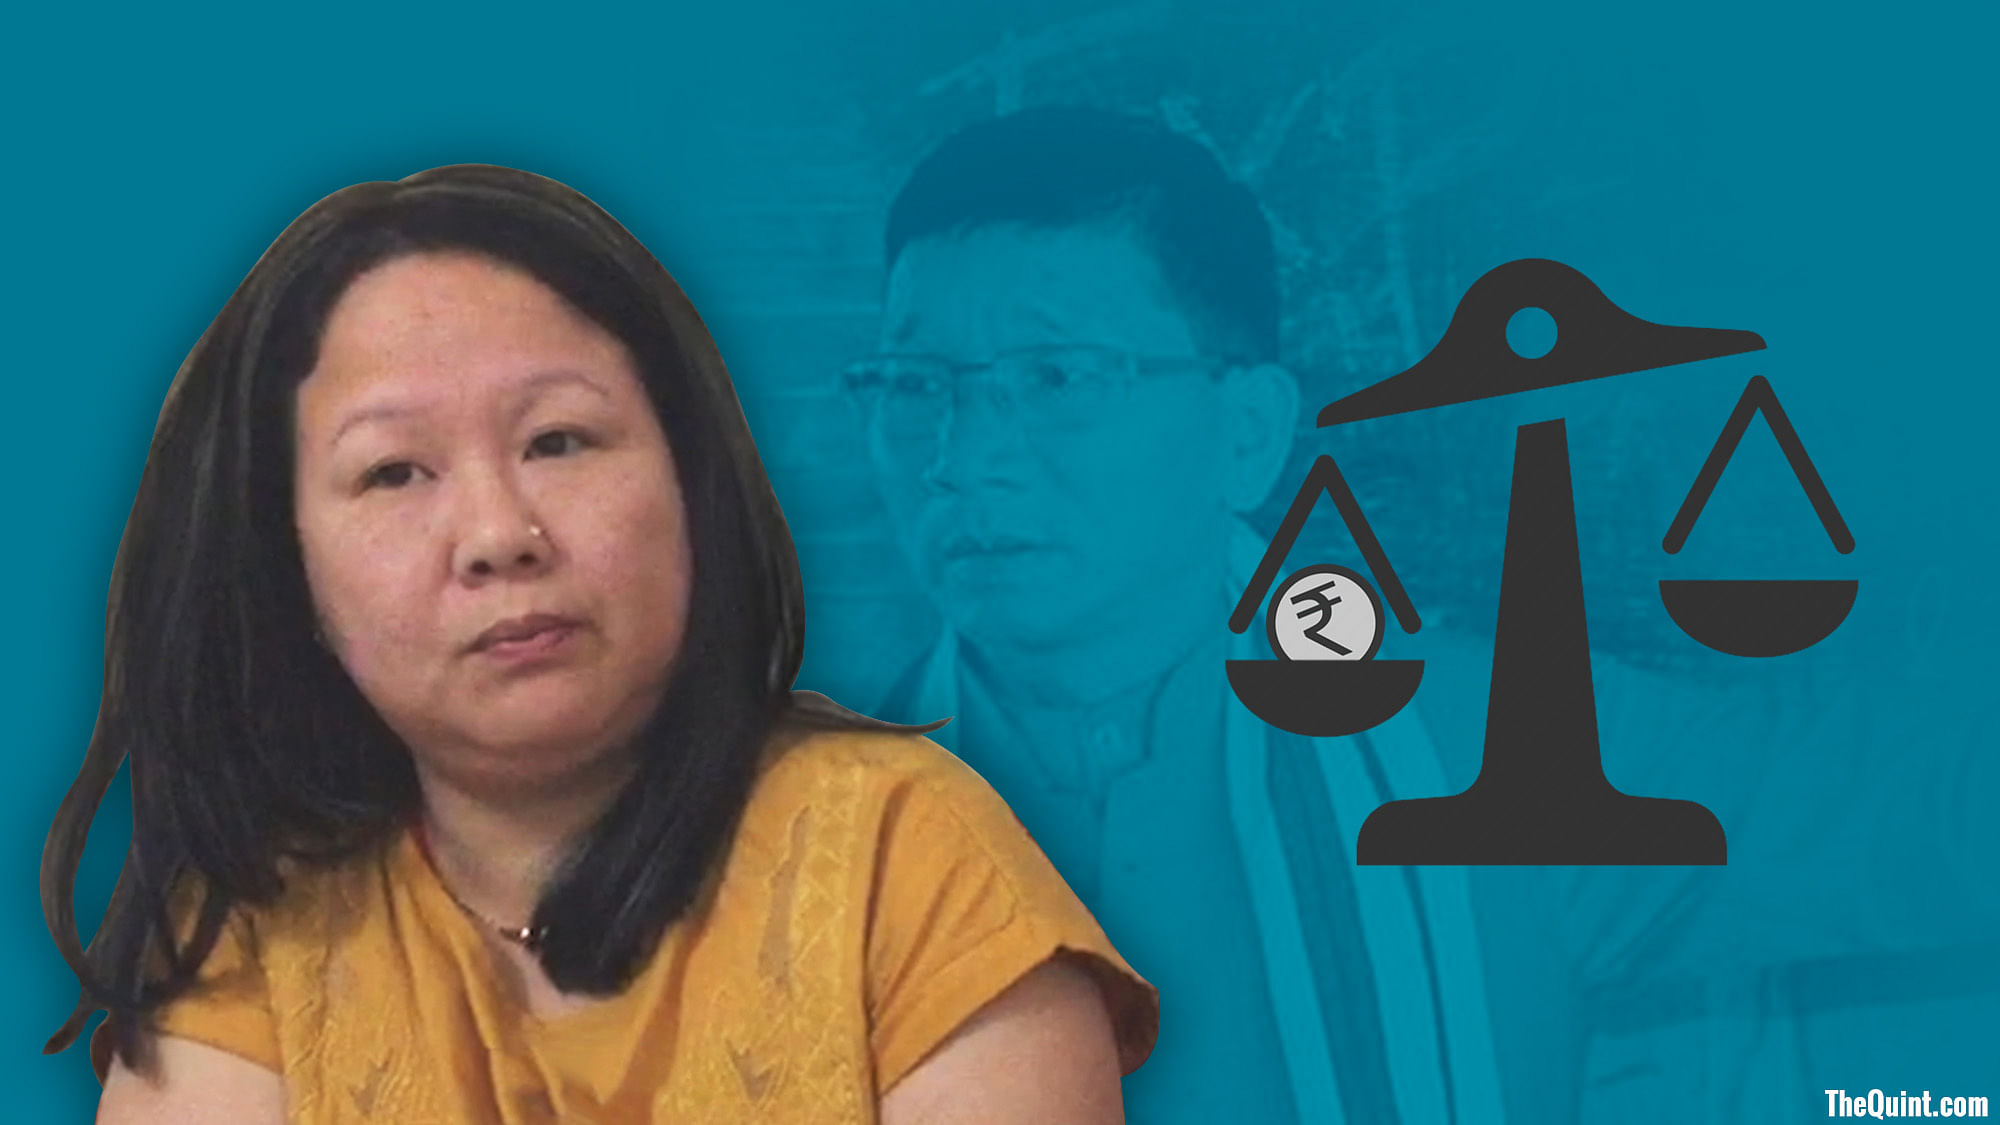 Late Arunachal Pradesh Chief Minister Kalikho Pul’s eldest widow Dangwimsai has demanded a probe against four Supreme Court judges for allegedly seeking  bribes in a case related to imposition of President’s Rule in the state last year. (Photo: Harsh Sahani/<b>The Quint</b>)